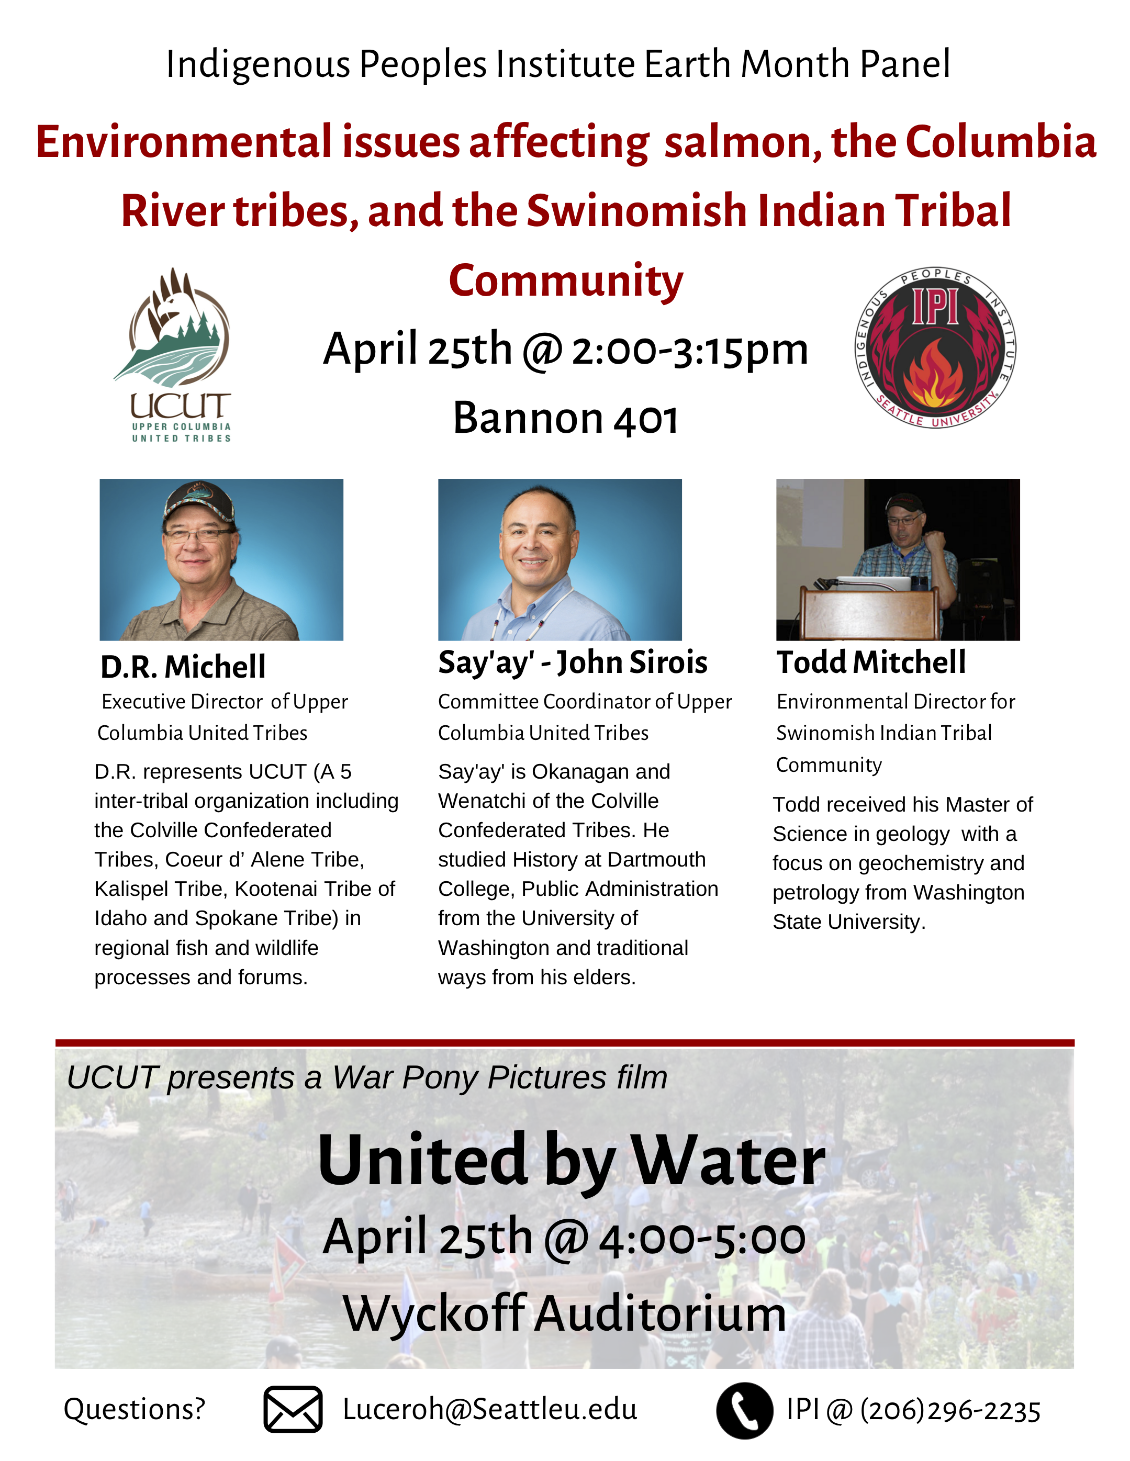 Past Indigenous Peoples Event surrounding salmon, water, the Upper Columbia United Tribes, and the Swinomish Tribe